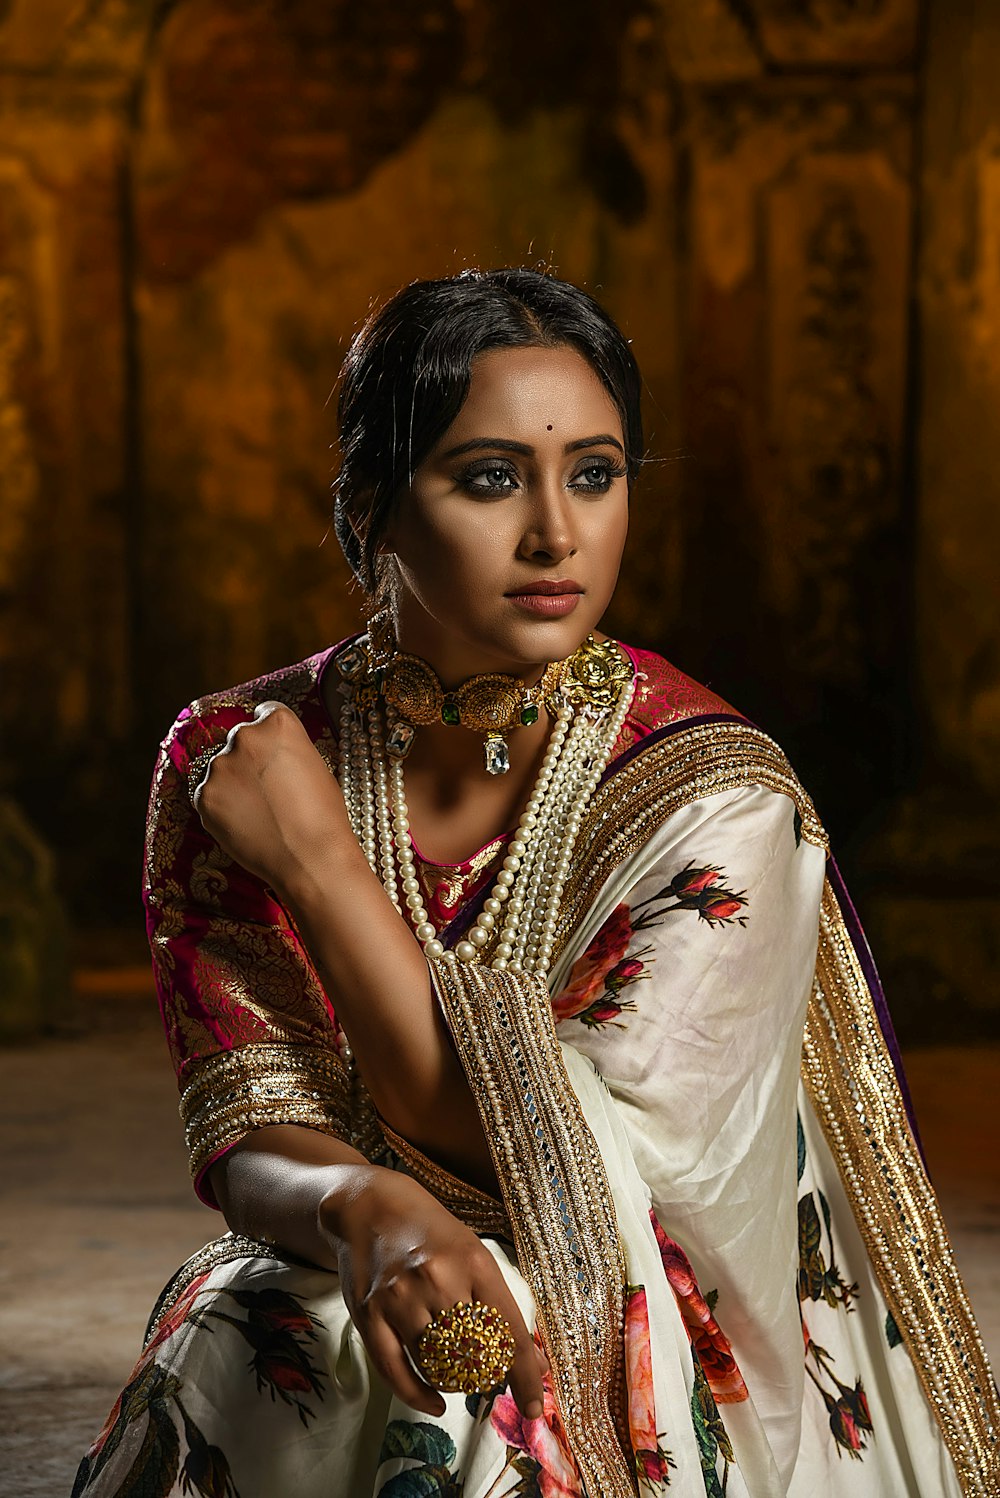 a woman in a white sari with gold jewelry